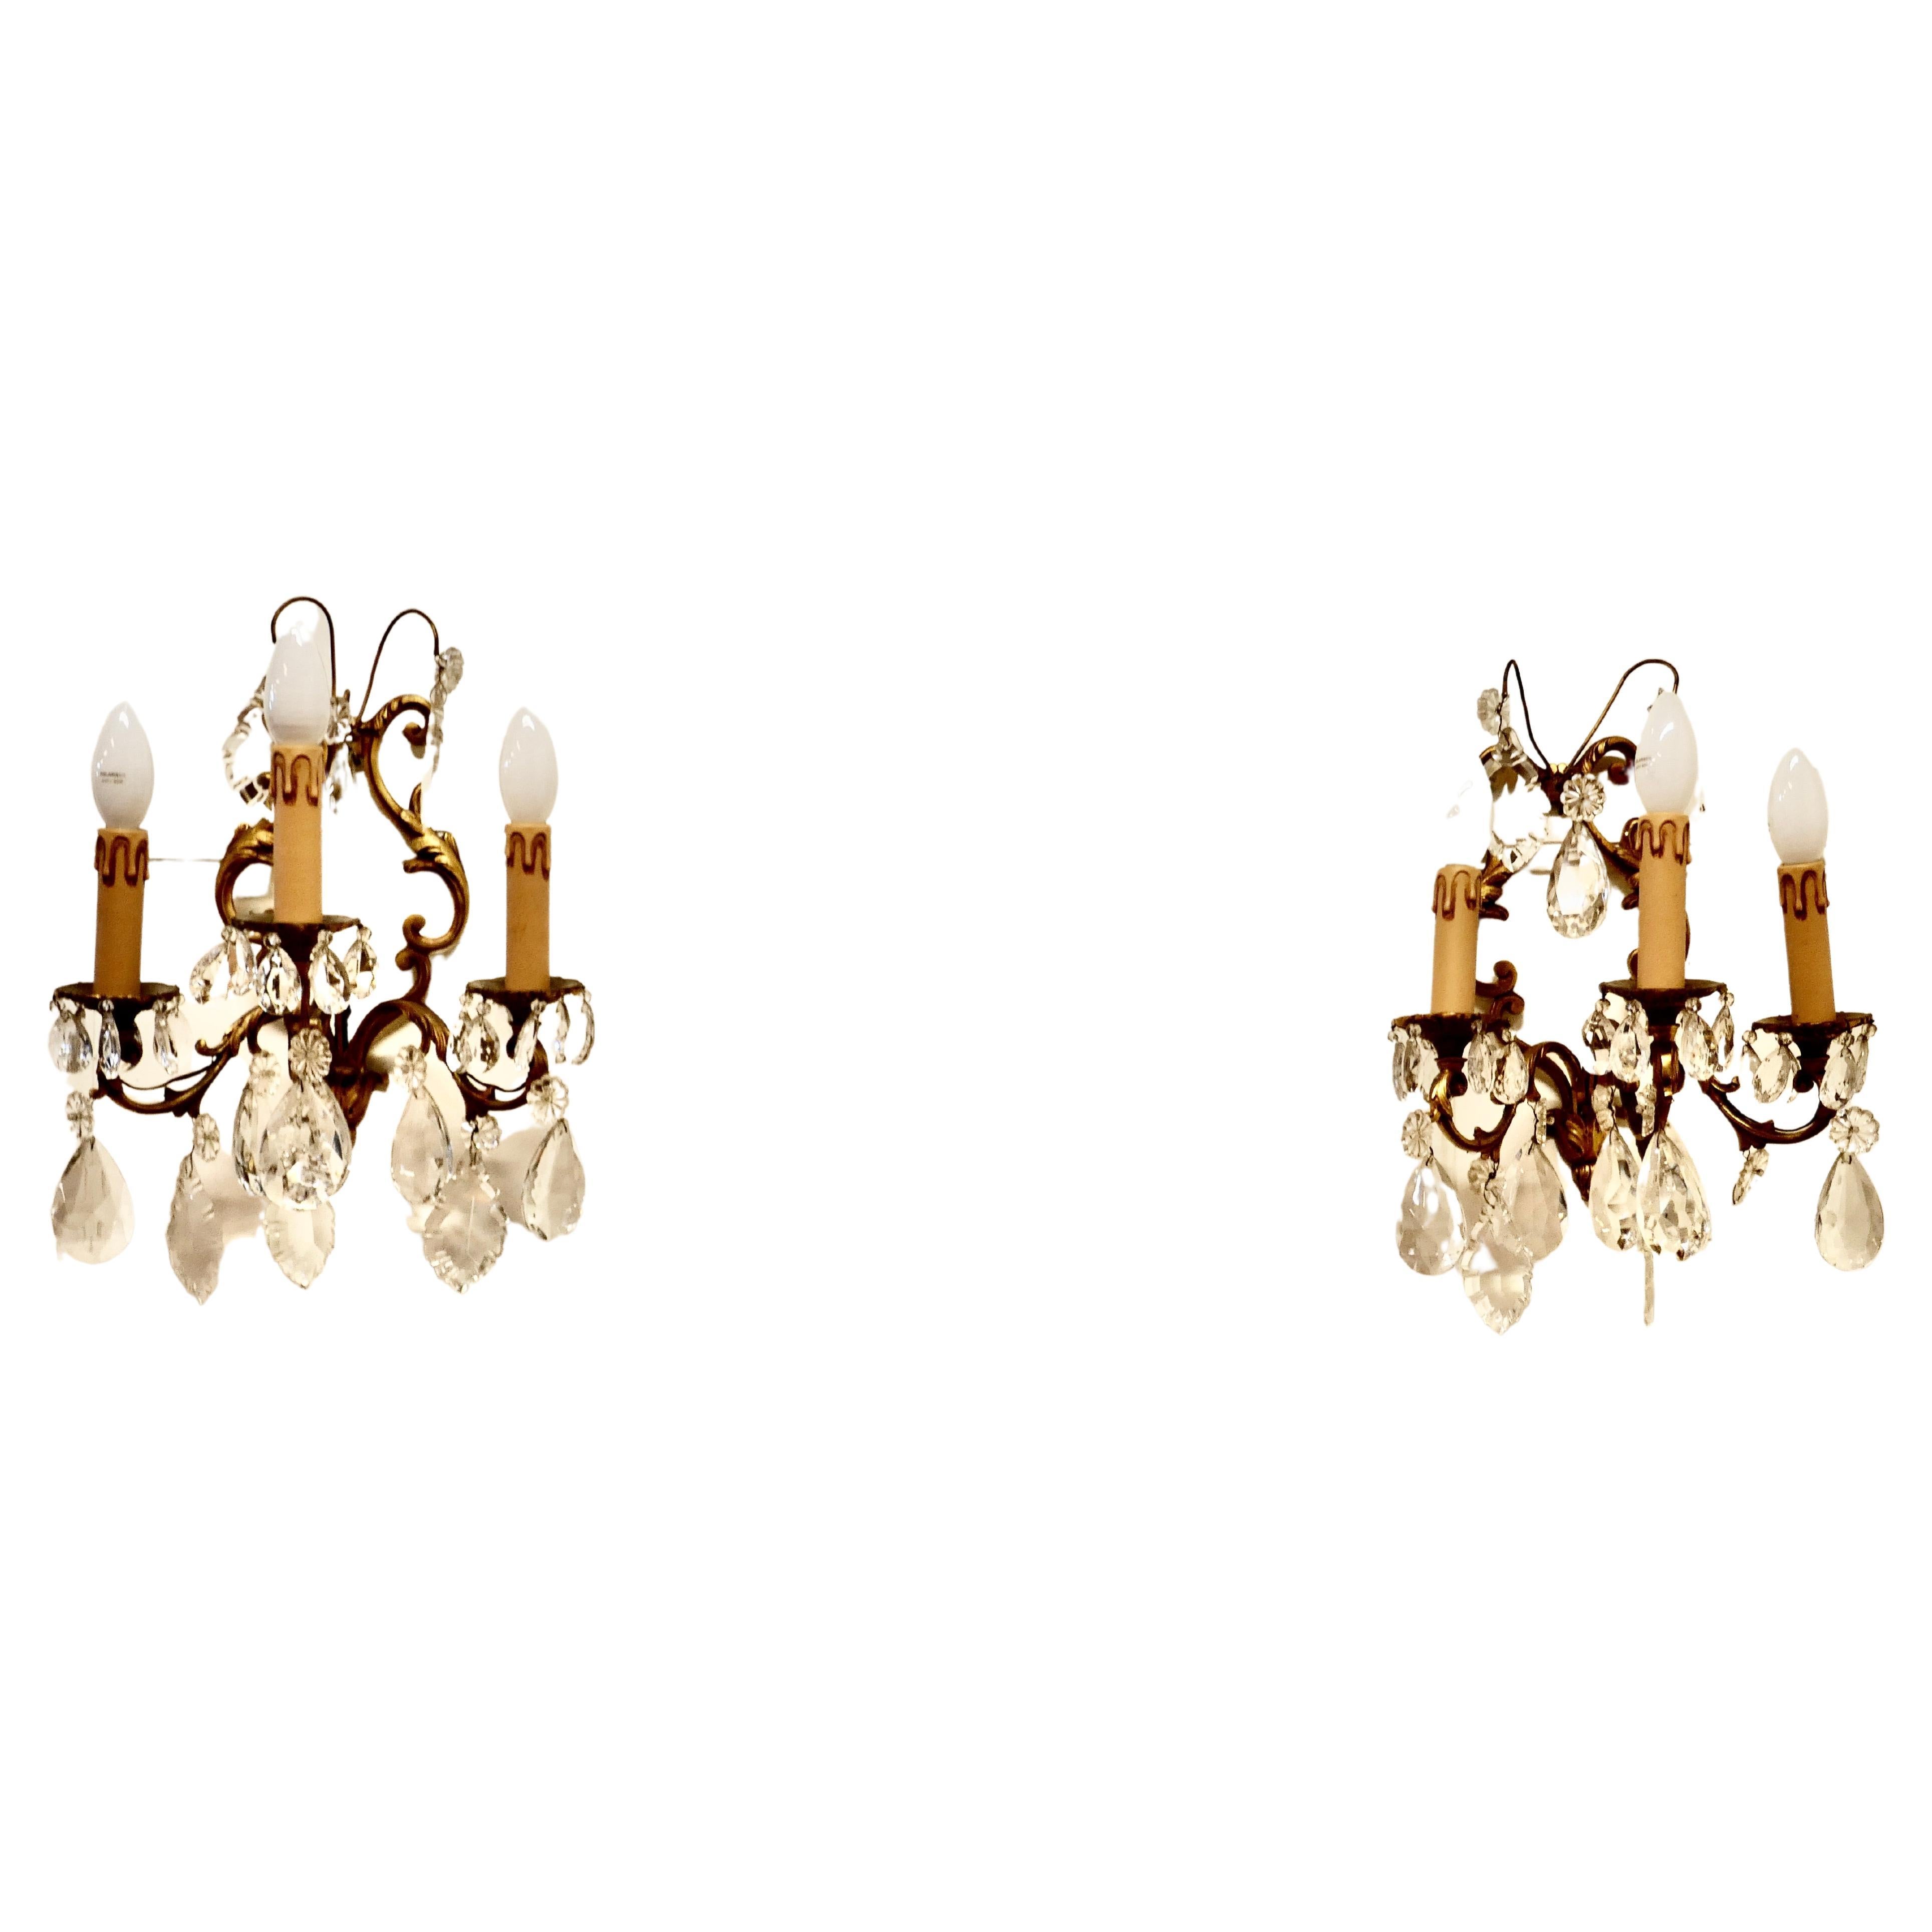 Pair of French Triple Wall Light Chandeliers